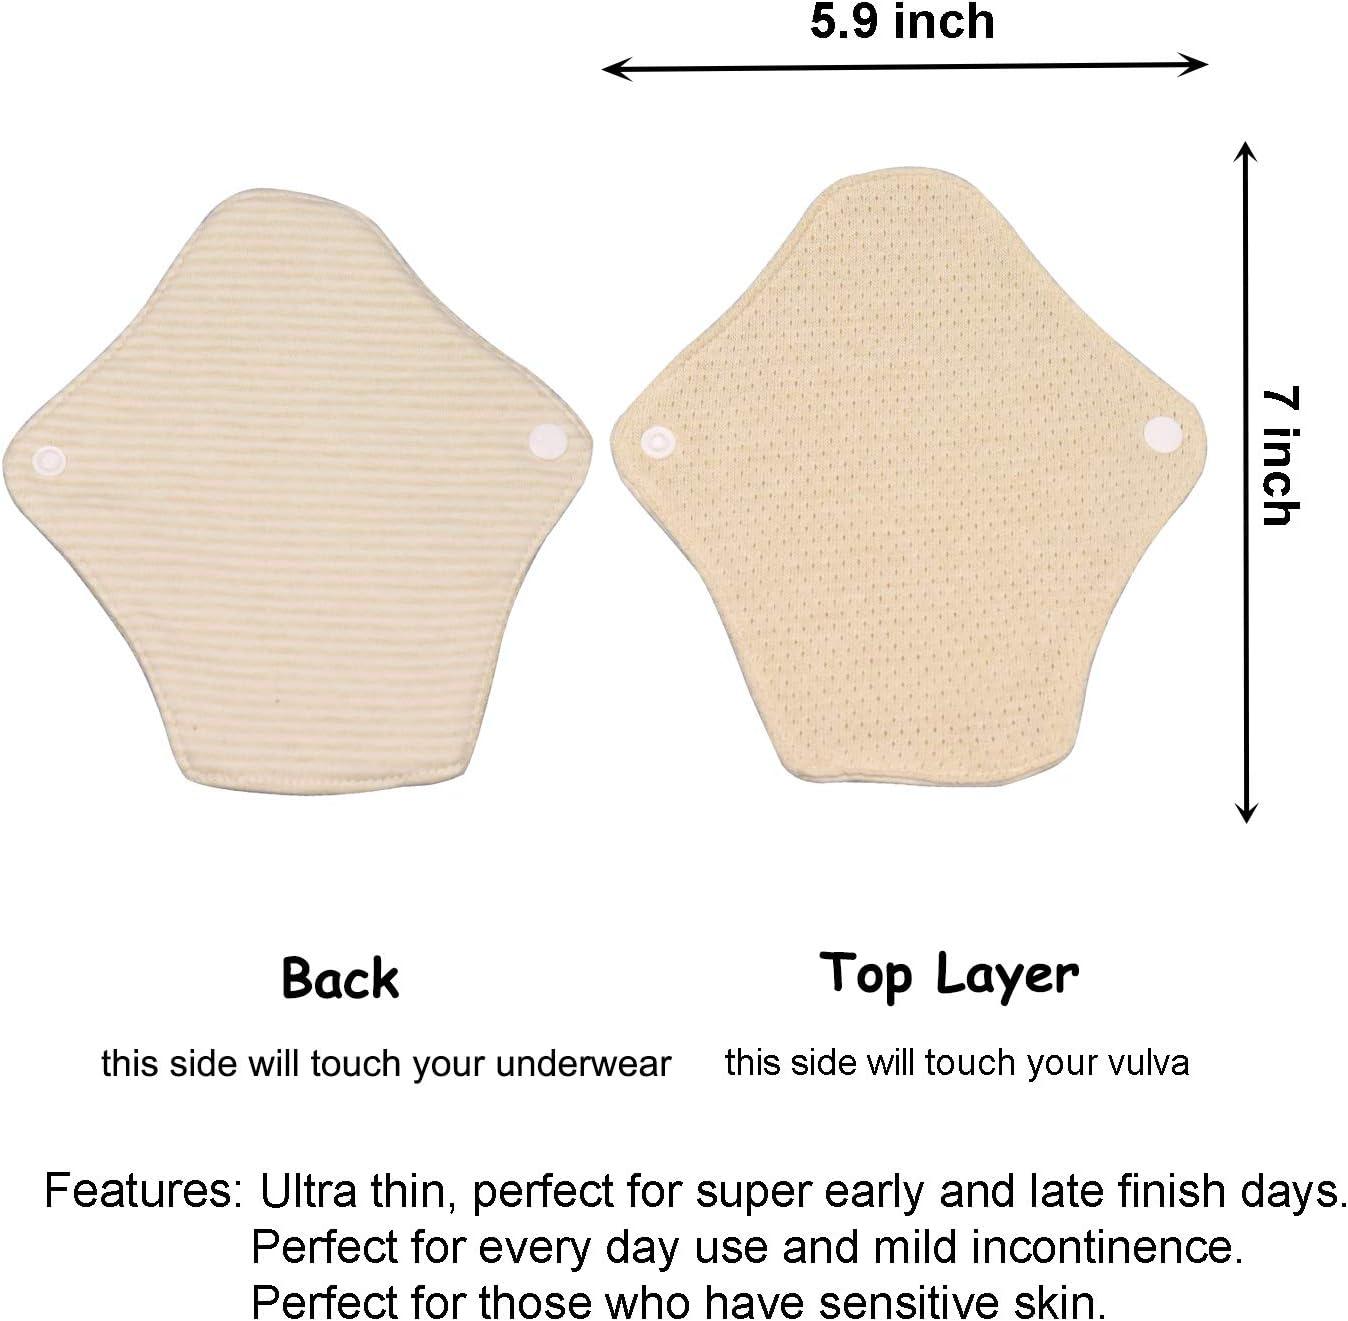 Best Organic Cotton Reusable Cloth Pads For Periods